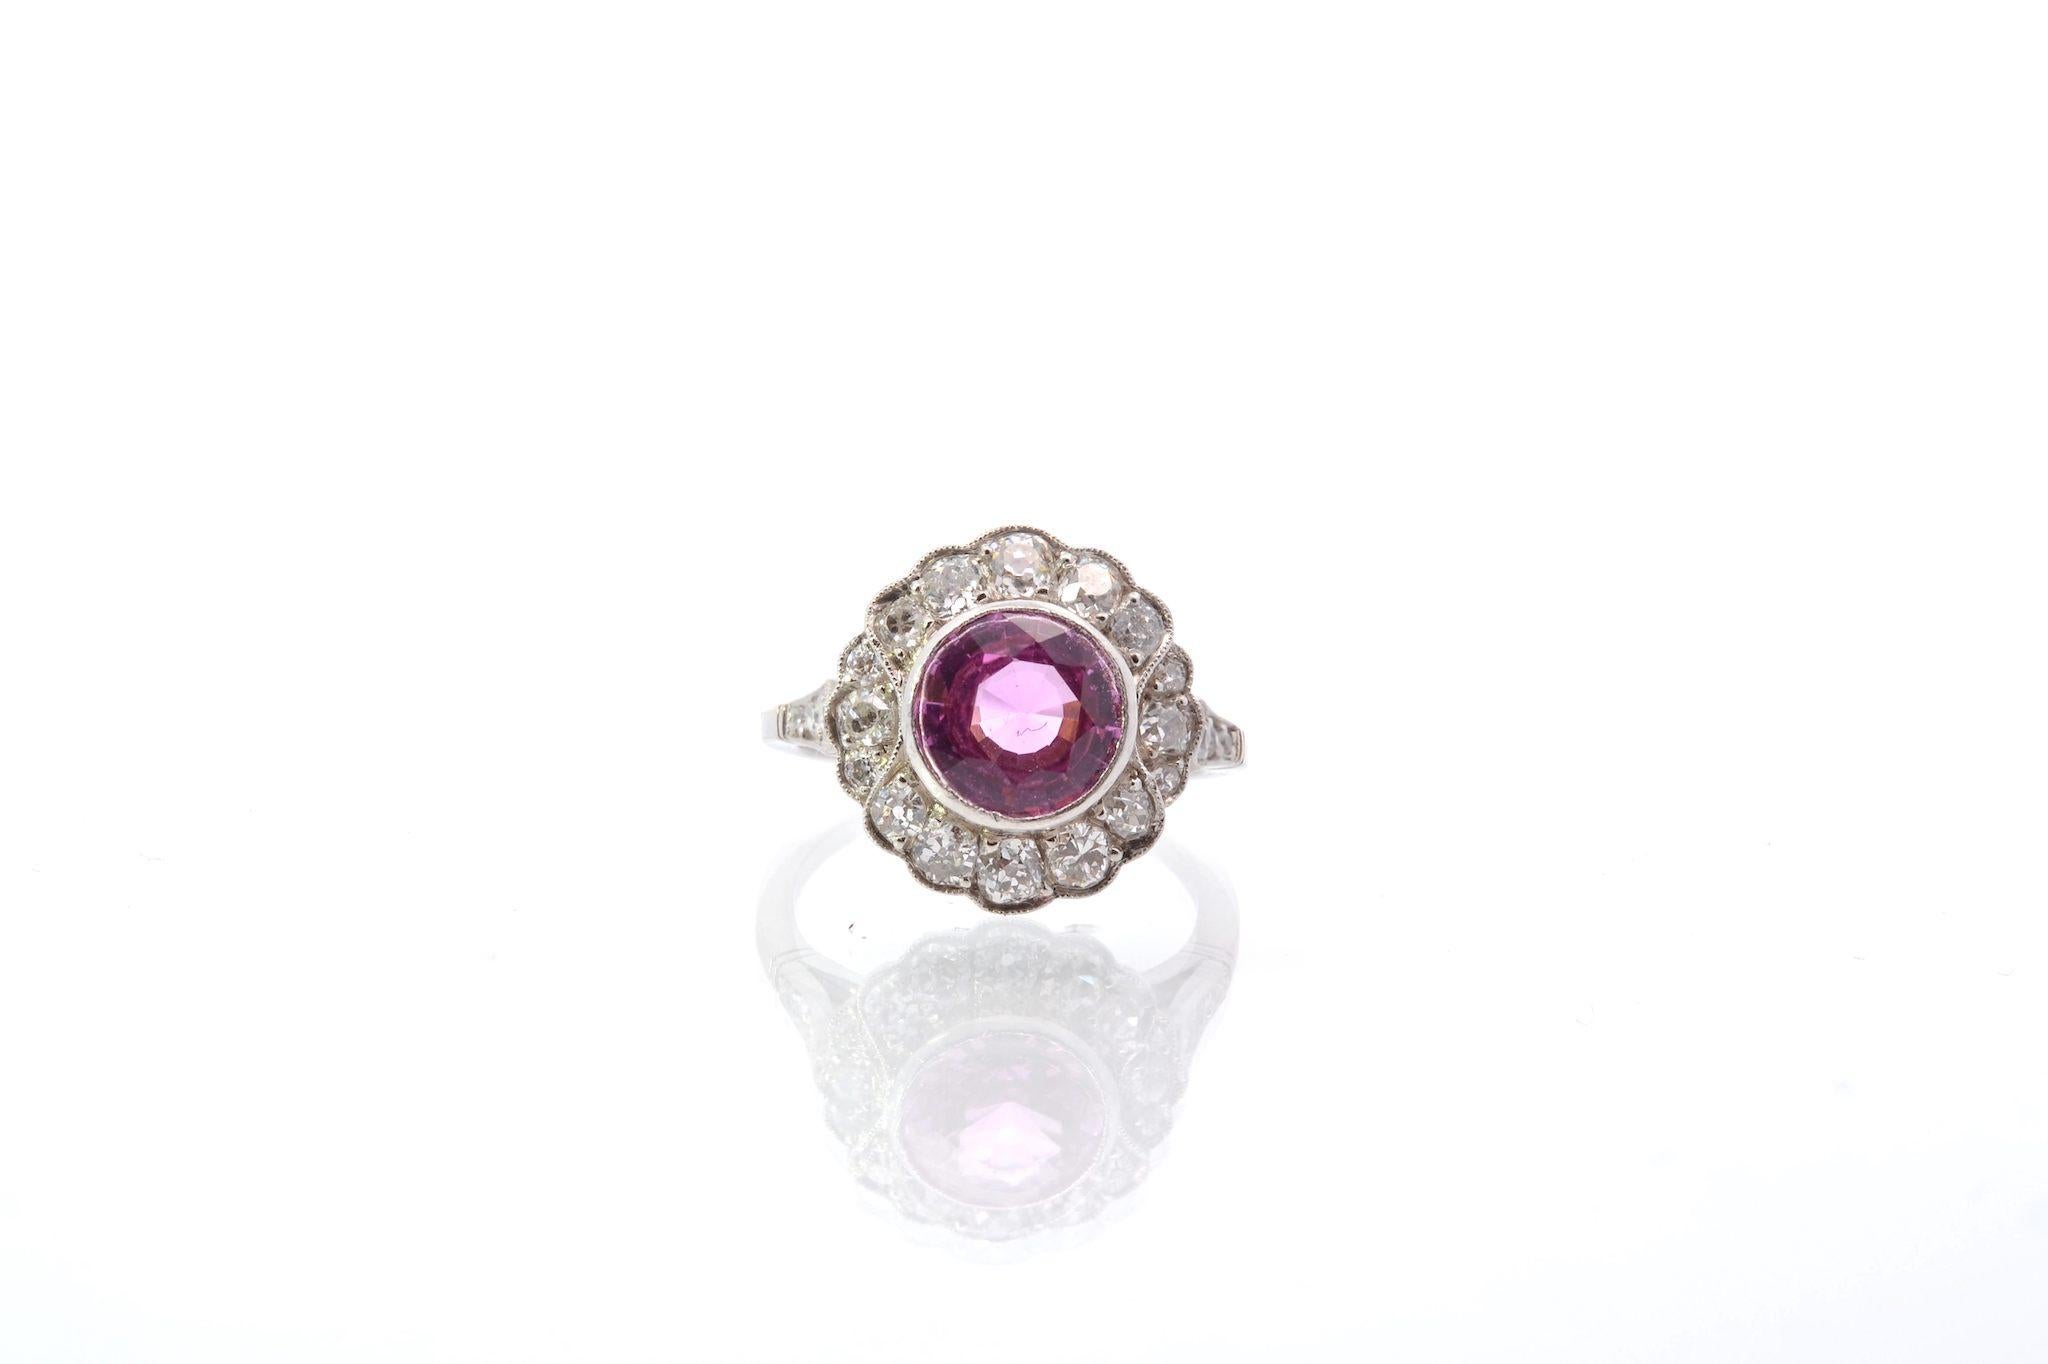 Stones: 1 pink sapphire of 1.95cts, 22 diamonds: 0.90ct
Material: Platinum
Dimensions: Diameter: 1.4cm
Weight: 6.2g
Period: Recent art deco style
Size: 50 (free sizing)
Certificate
Ref. : 25455dv